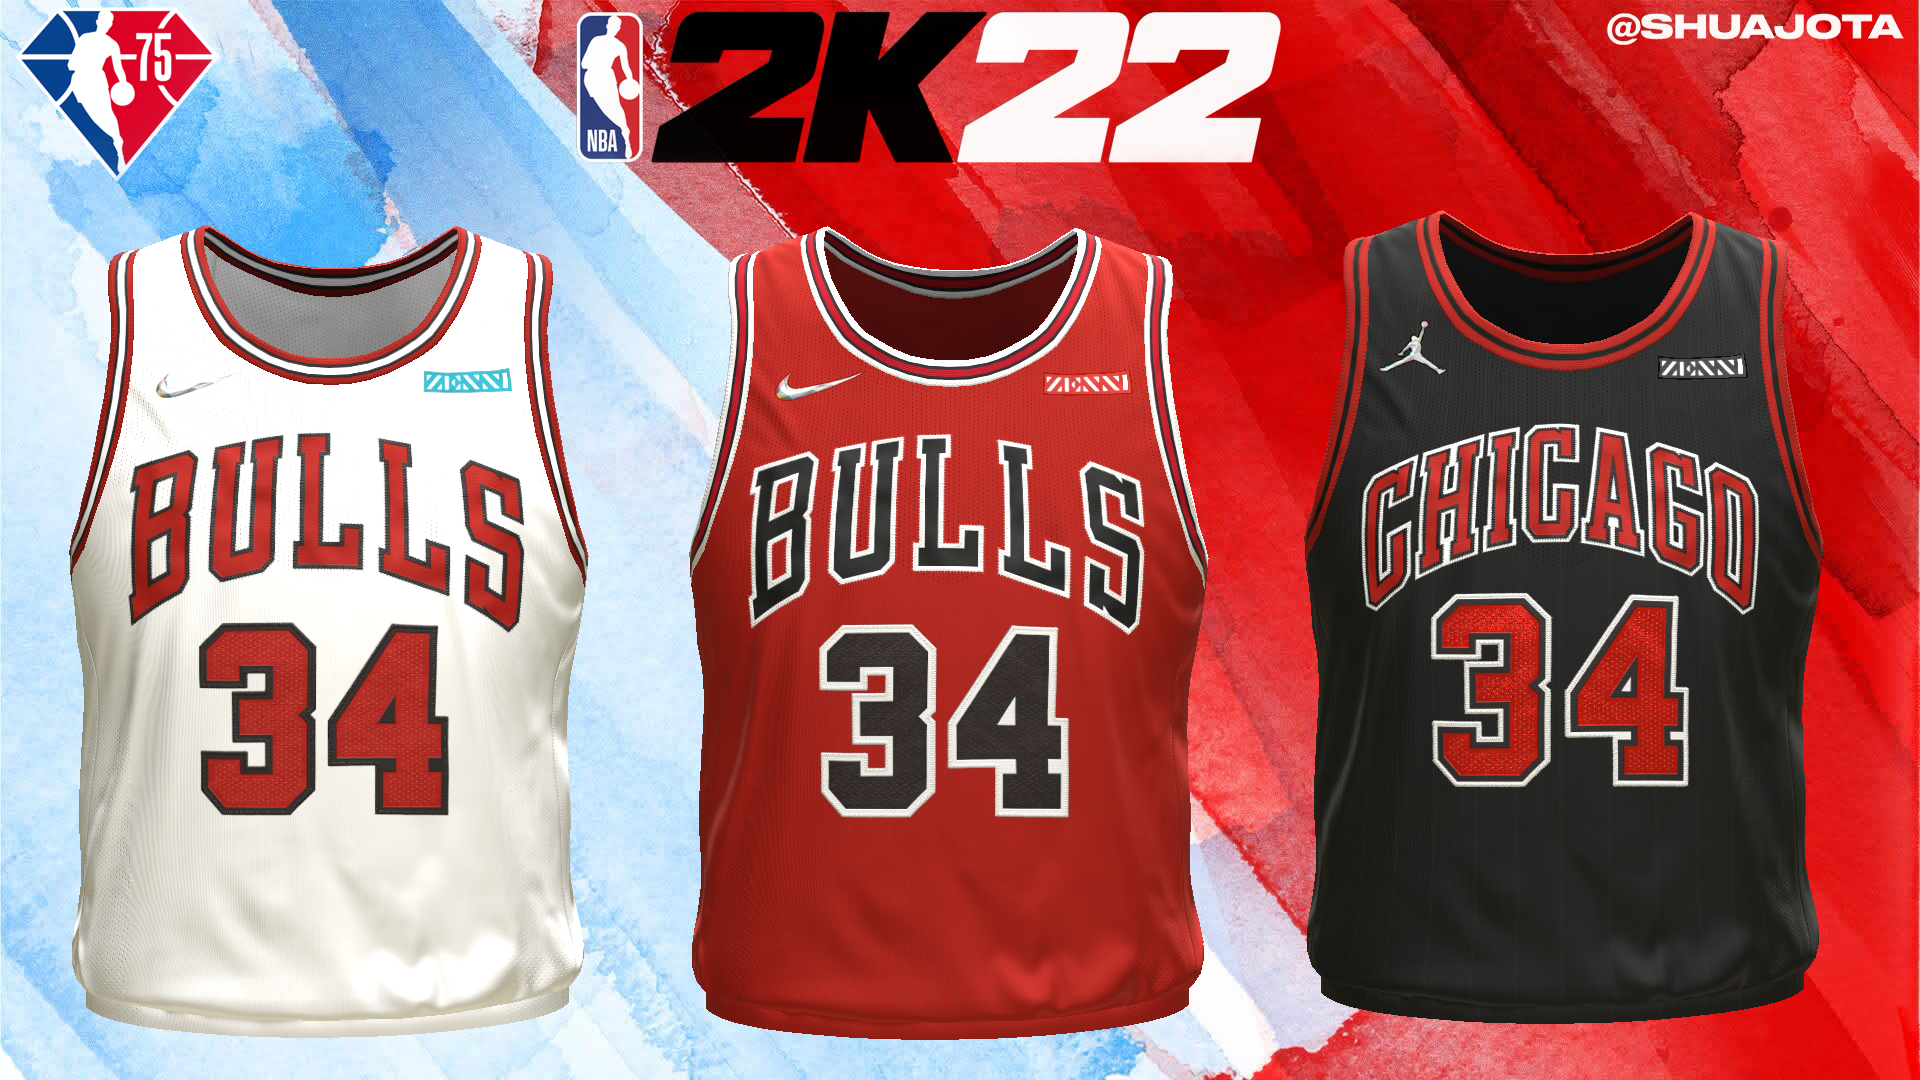 NBA 2K22 Official Chicago Bulls 2021 2022 Jerseys (Compatible With NBA 2K21 & NBA 2K20): NBA 2K22 Mods, Rosters & Cyberfaces